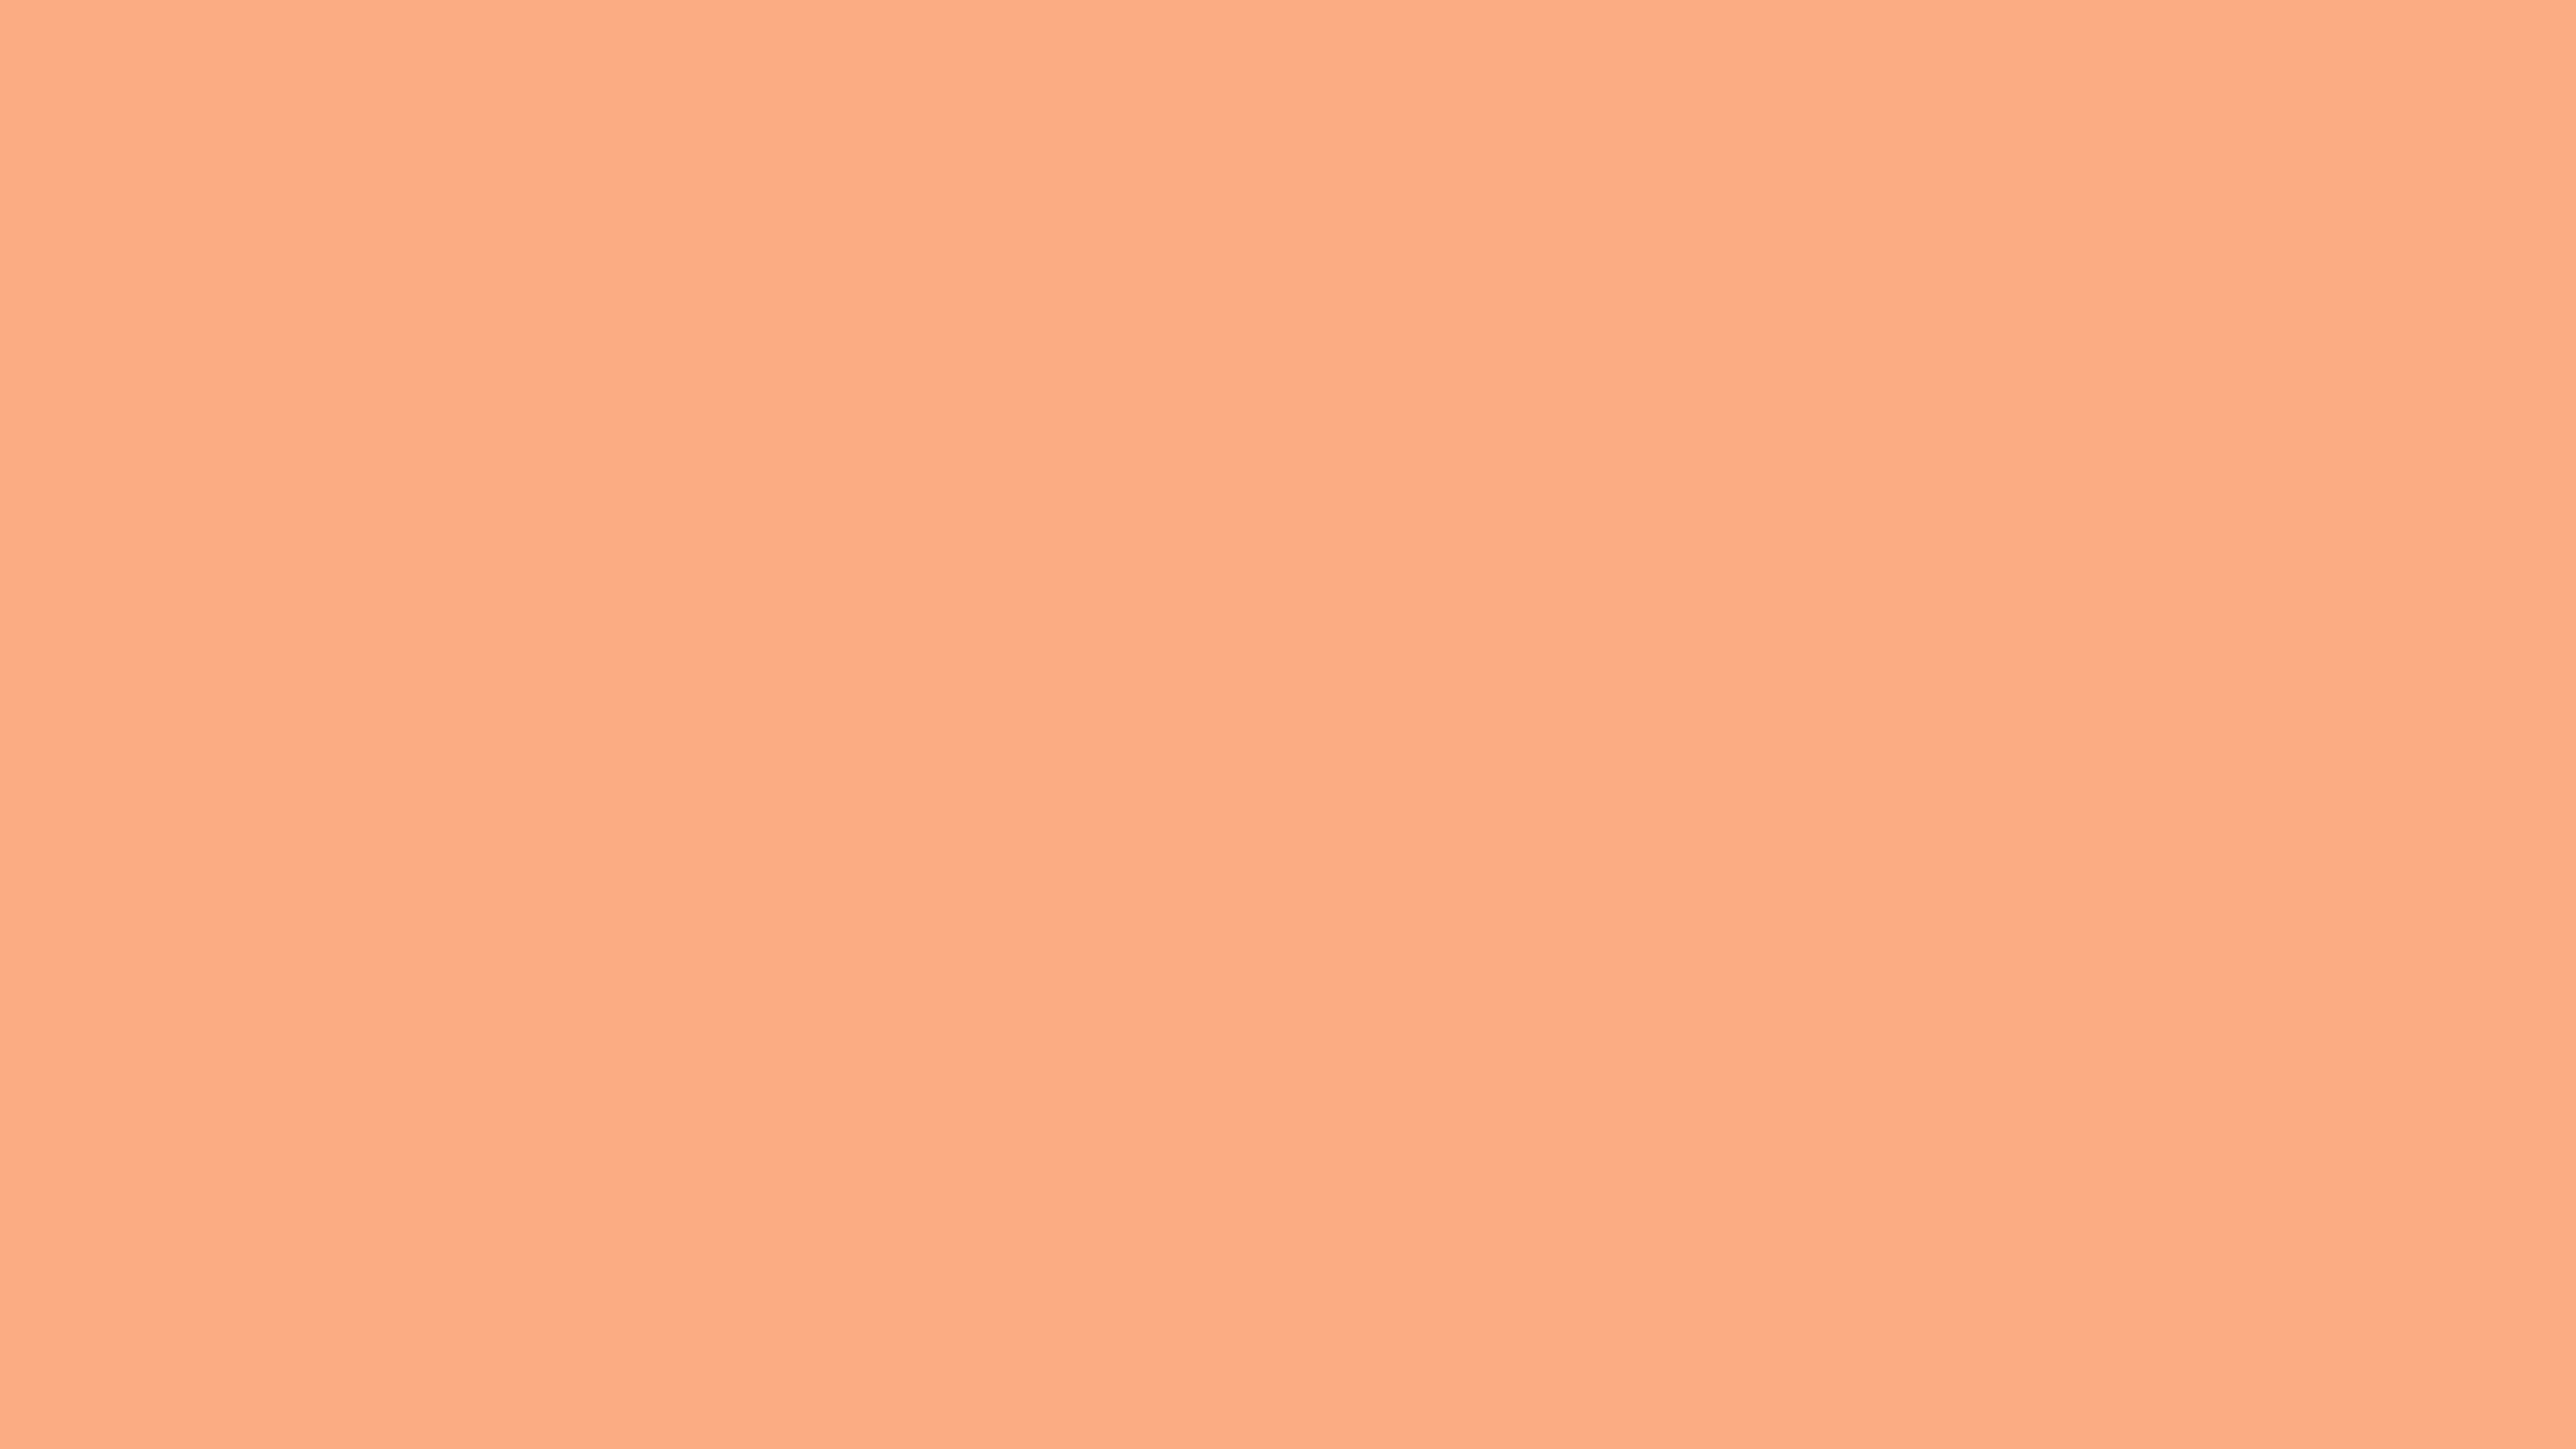 Apricot Wash Solid Color Background Image | Free Image Generator